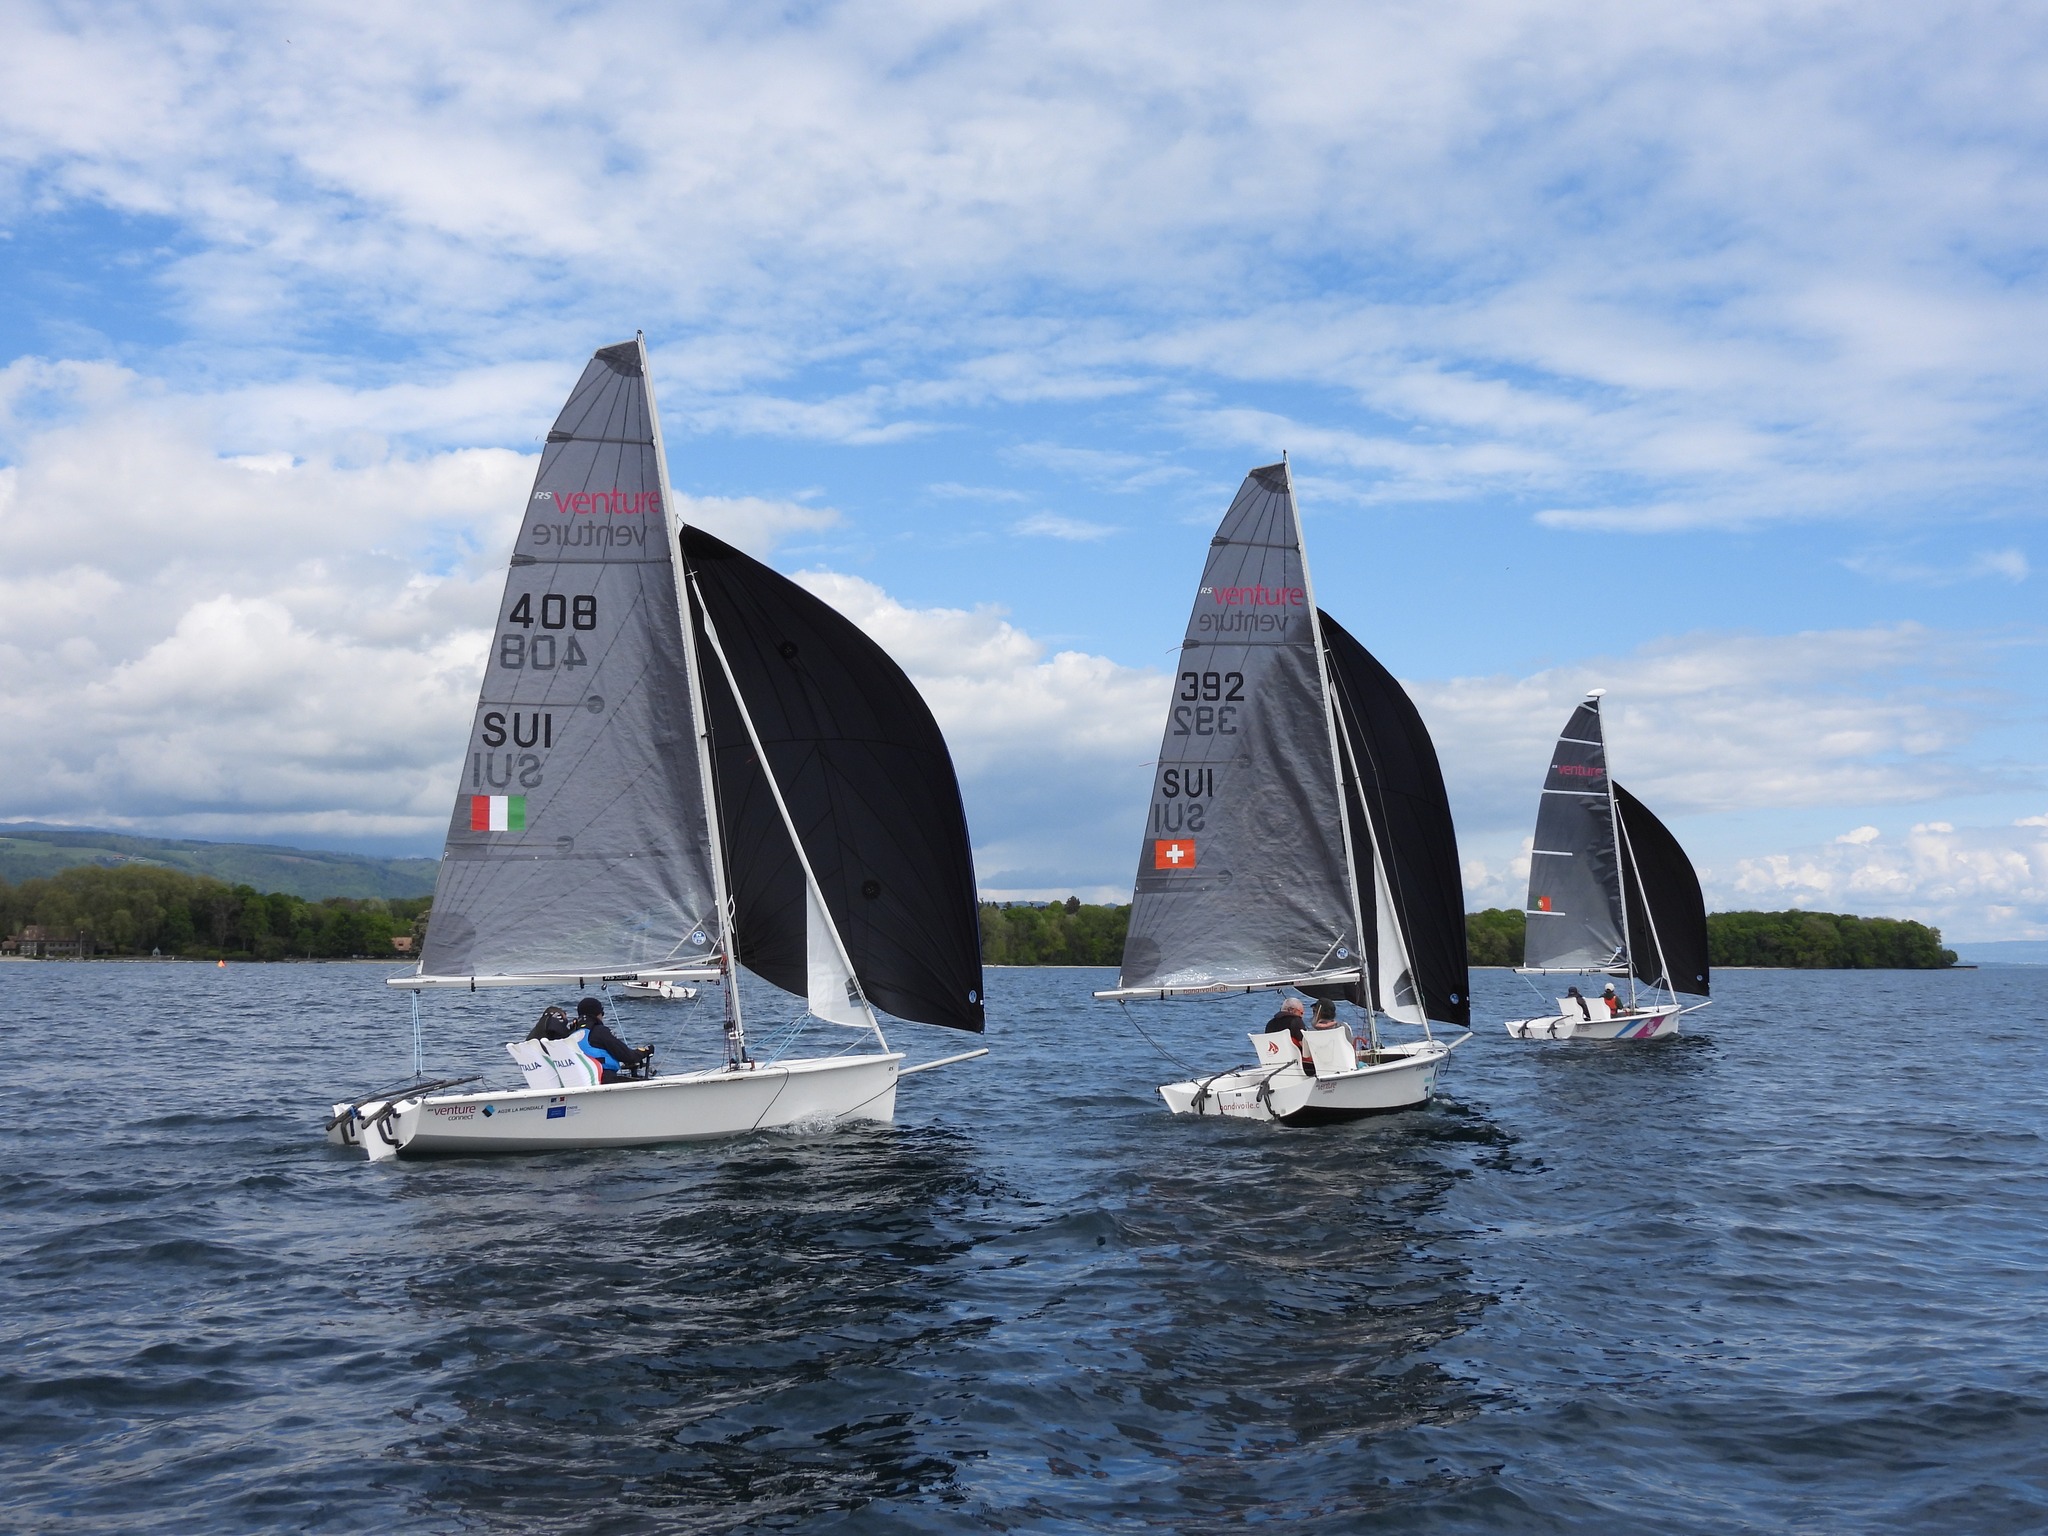  RS Venture  Swiss Inclusive Cup  CV Prangins  Final results